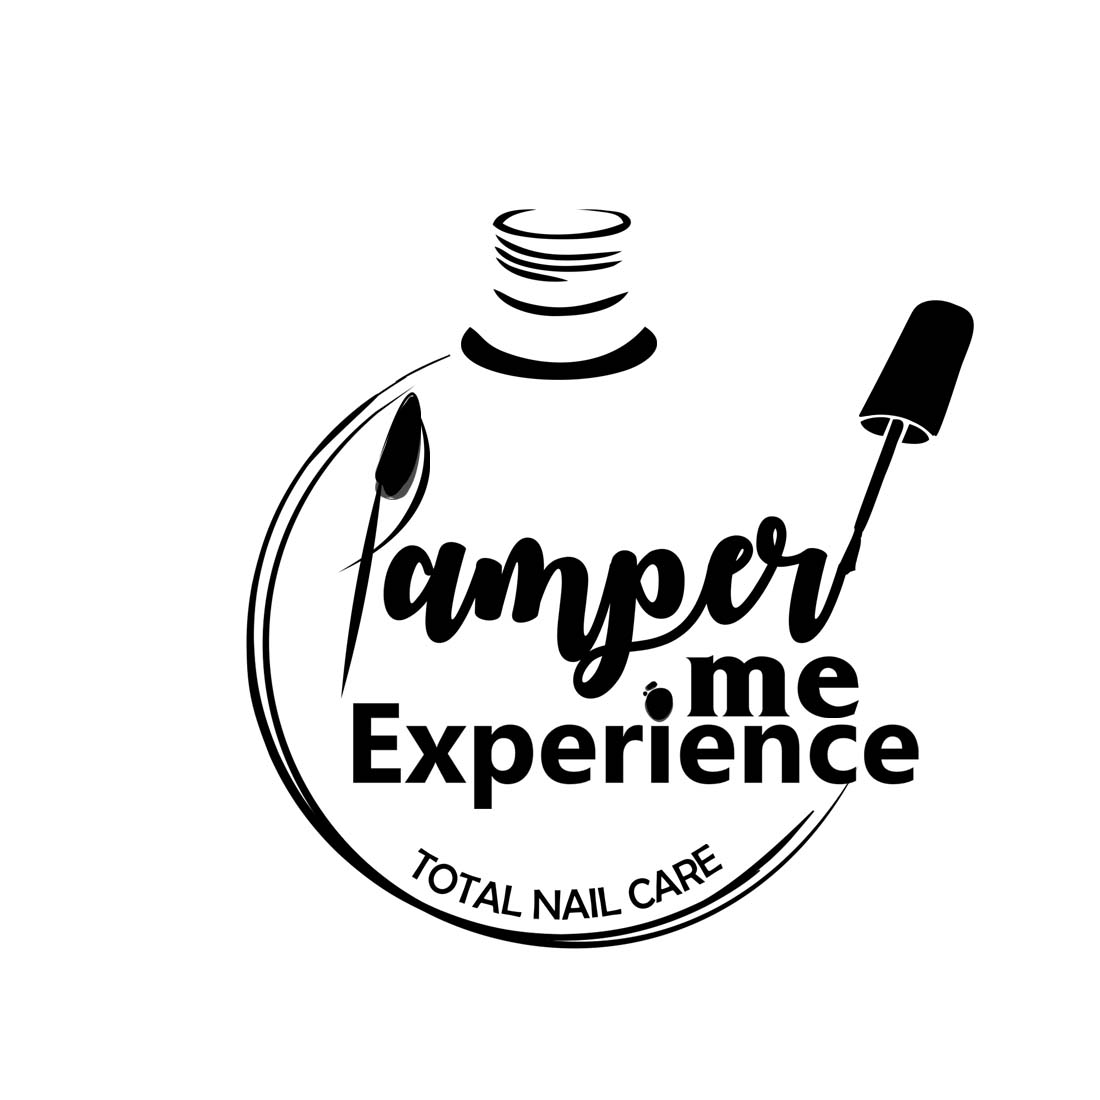 Nails Spa and Nail Care Logo Design in black color.